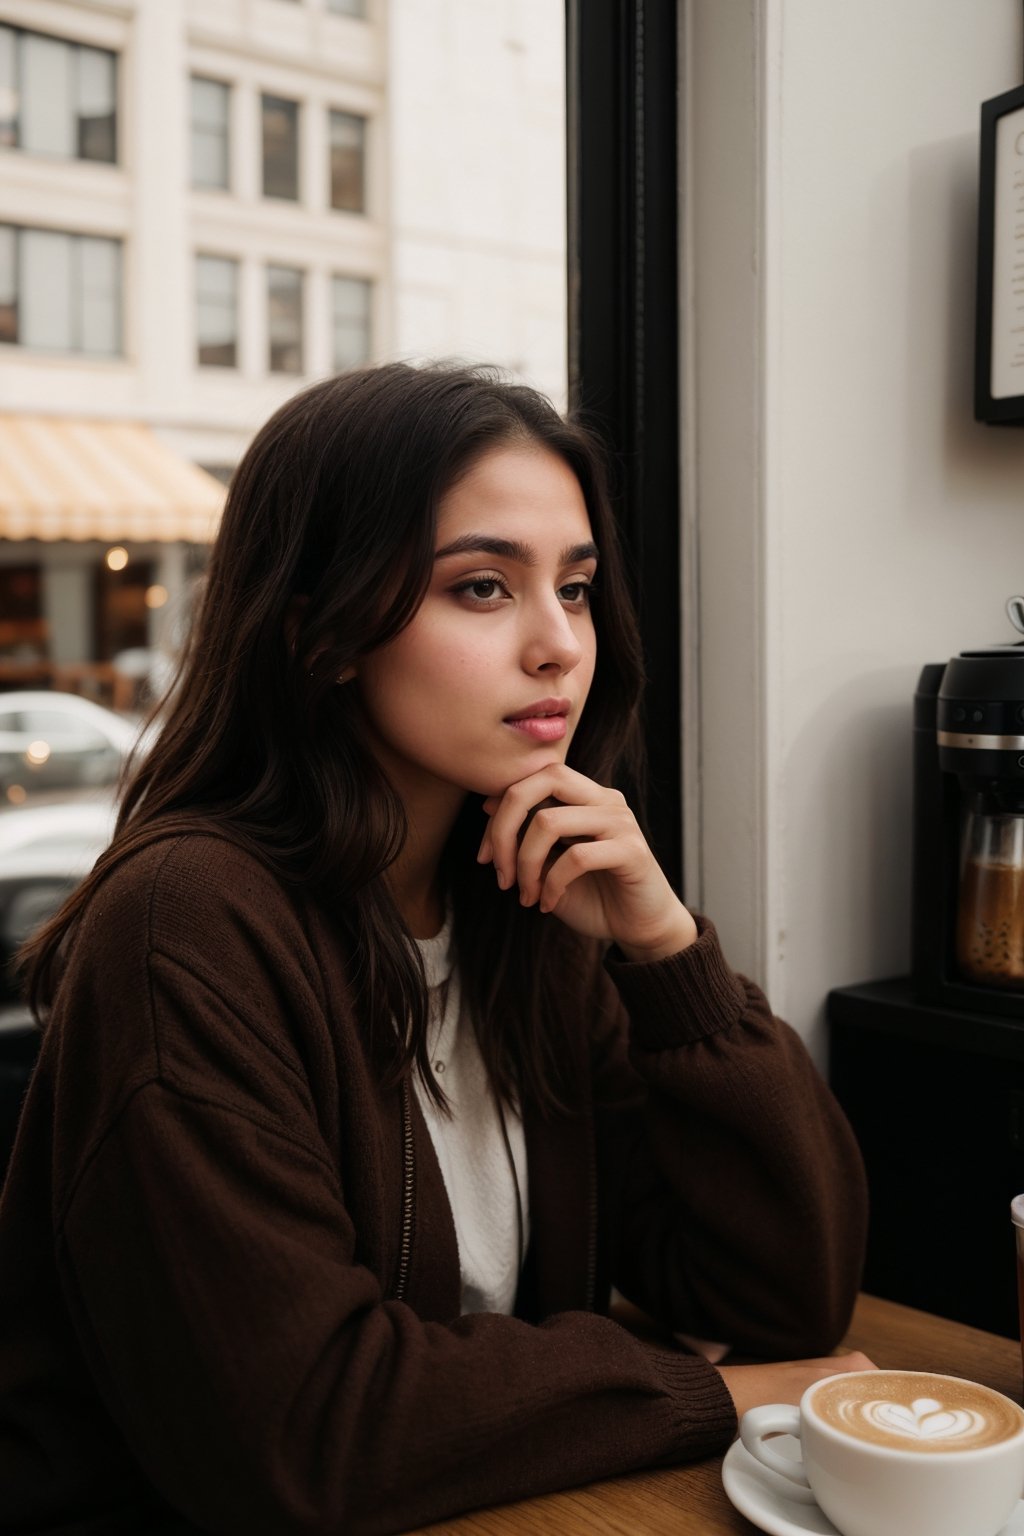 cozy coffee shop ambiance with a beautiful young girl enjoying a quiet moment. Hip, relaxed, stylish, youthful, cozy. Film camera. Portrait lens. Late afternoon. Lifestyle coffee portrait. Classic black and white film.